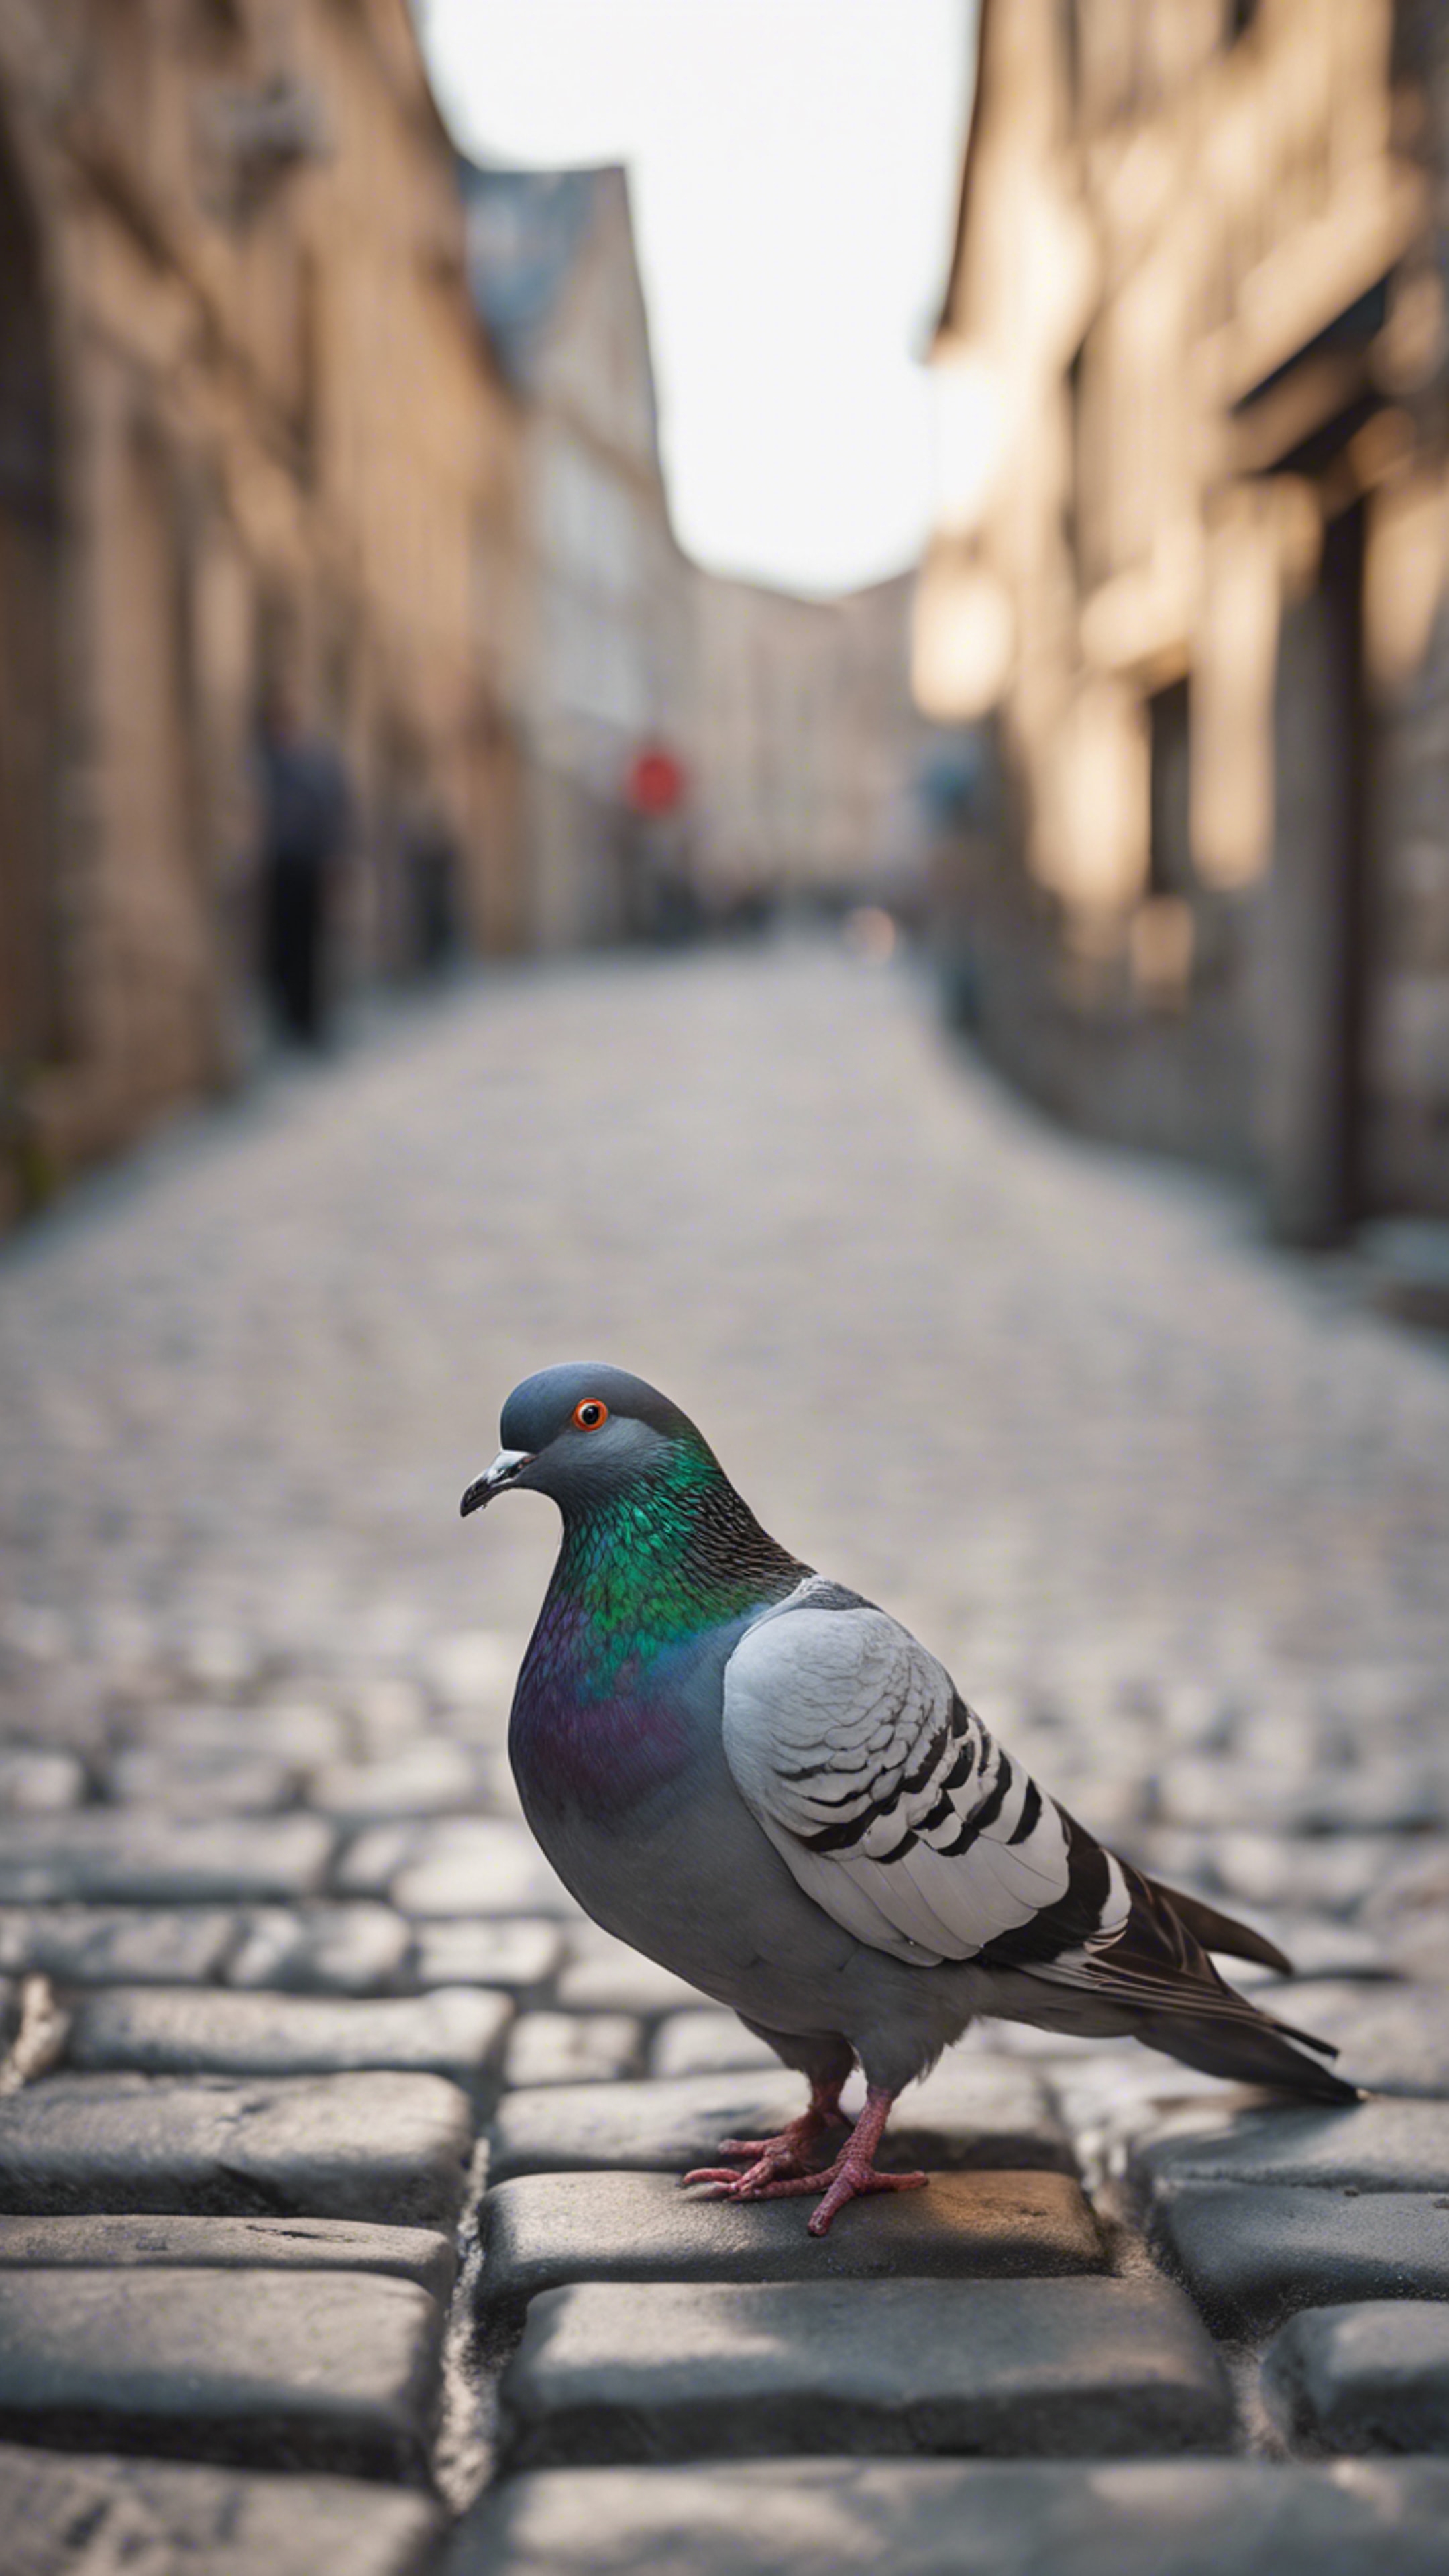 A pigeon standing on cobblestone street in the middle of an old city, its beautiful light gray plumage glistening. Тапет[03a93bb4226c4140ad33]